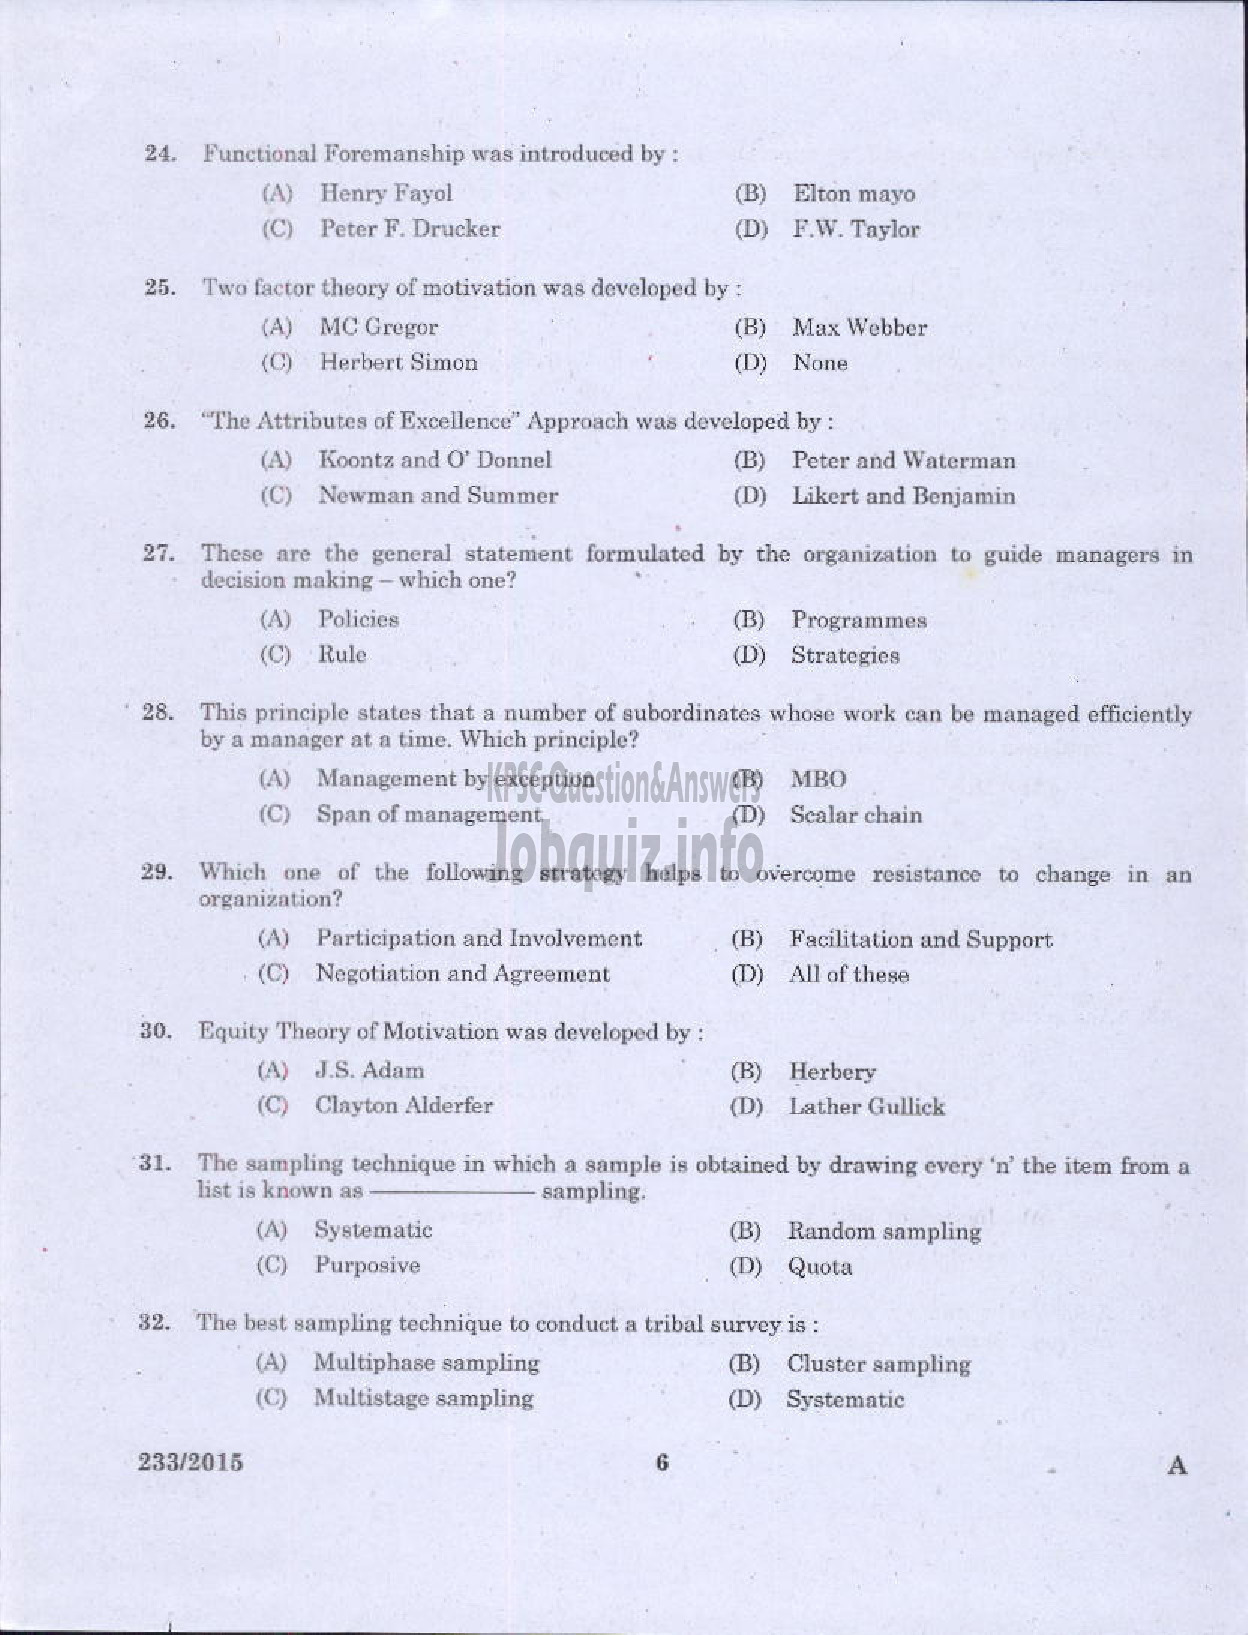 Kerala PSC Question Paper - LECTURER IN COMMERCE TECHNICAL EDUCATION-4